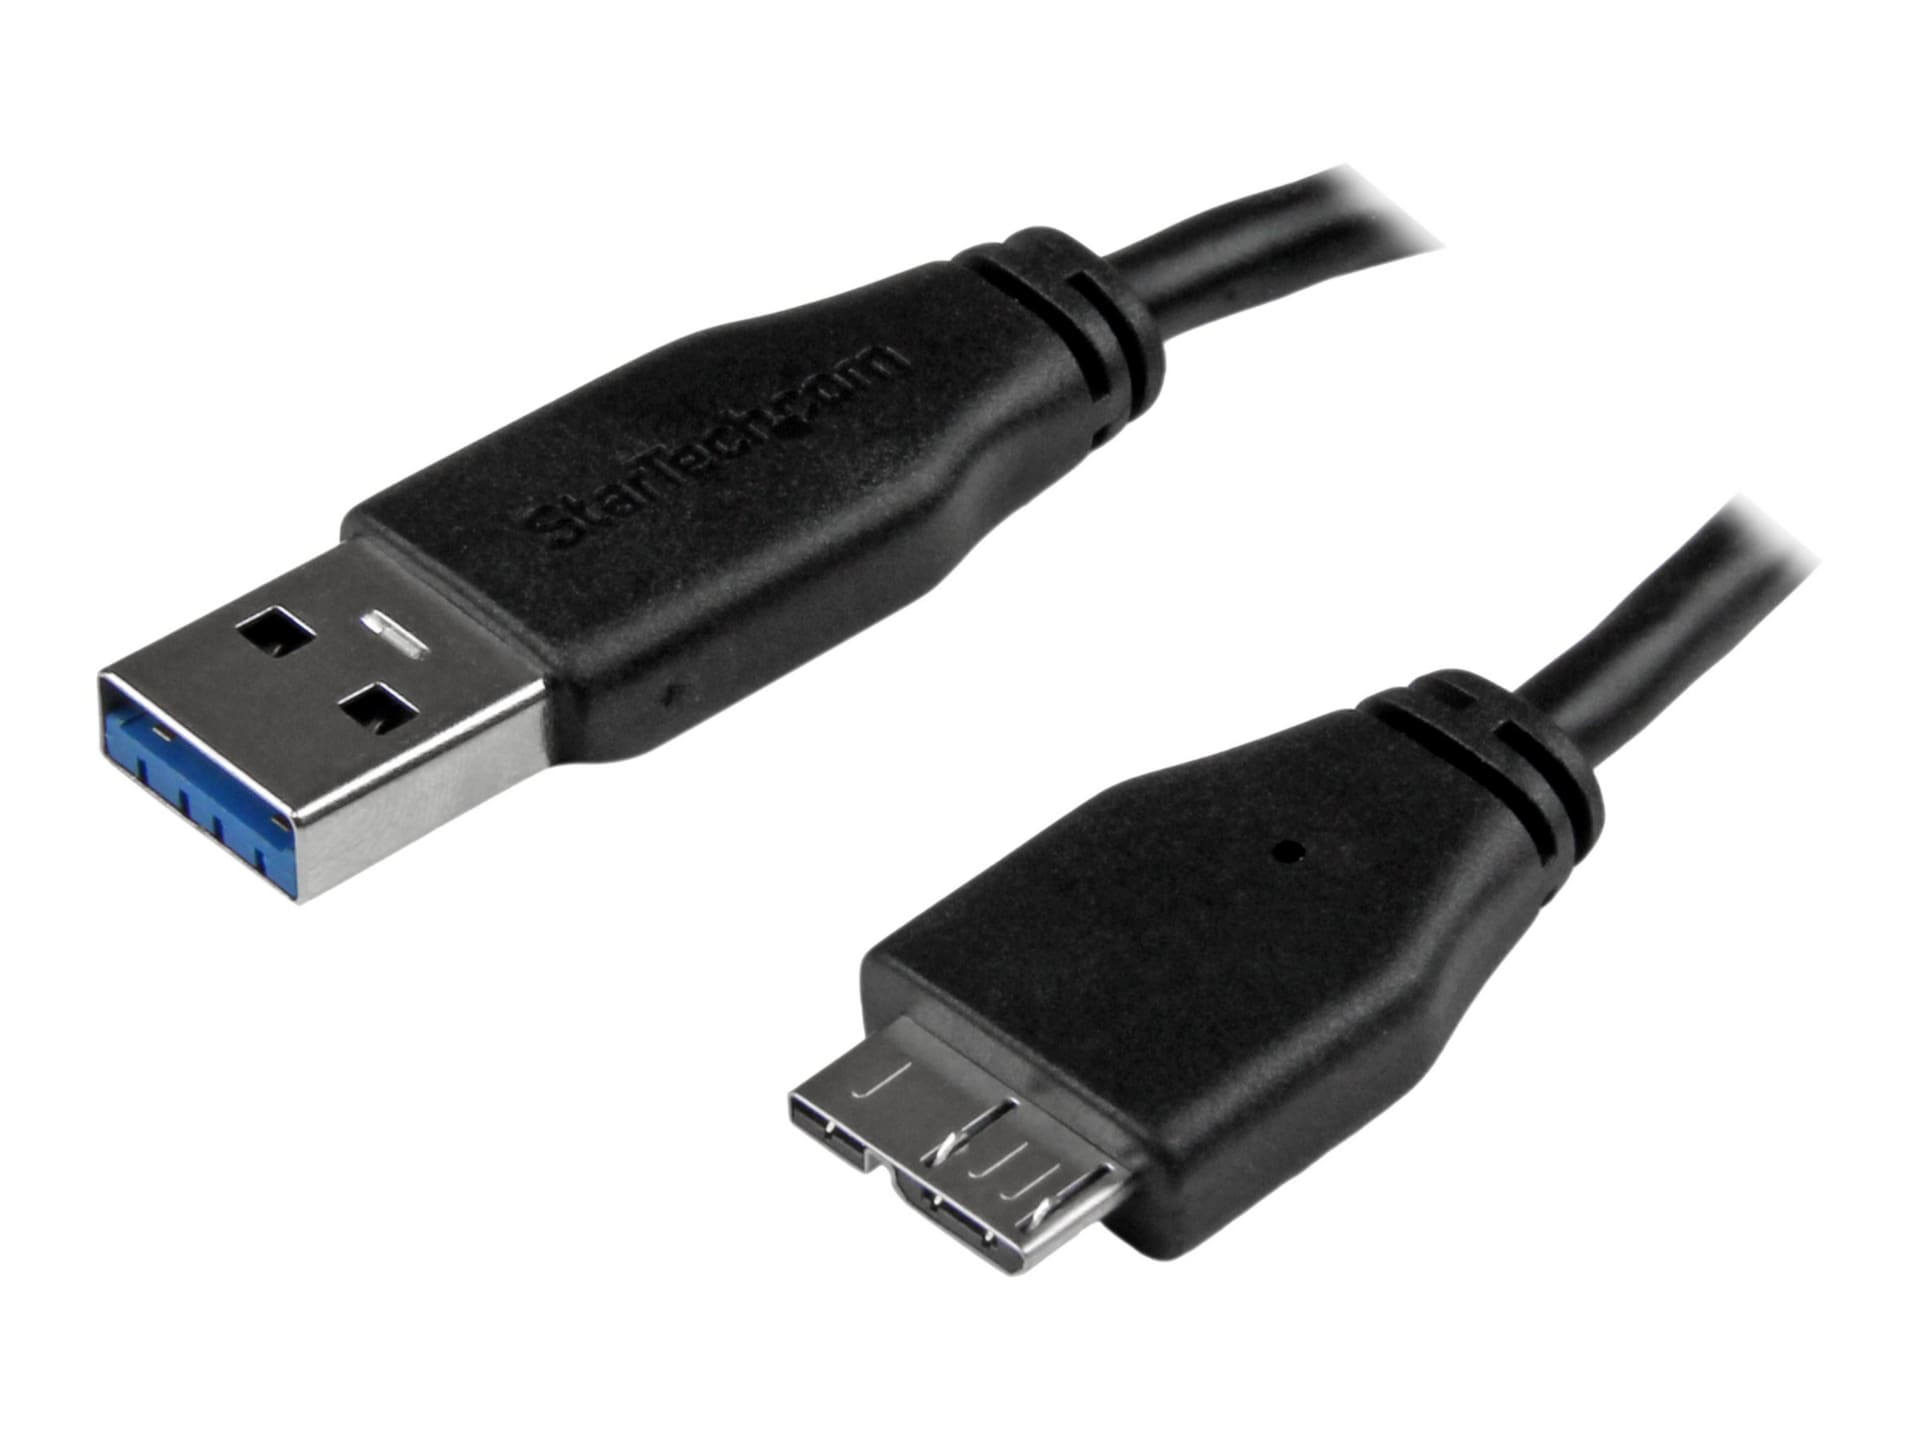 usb a to usb micro cable